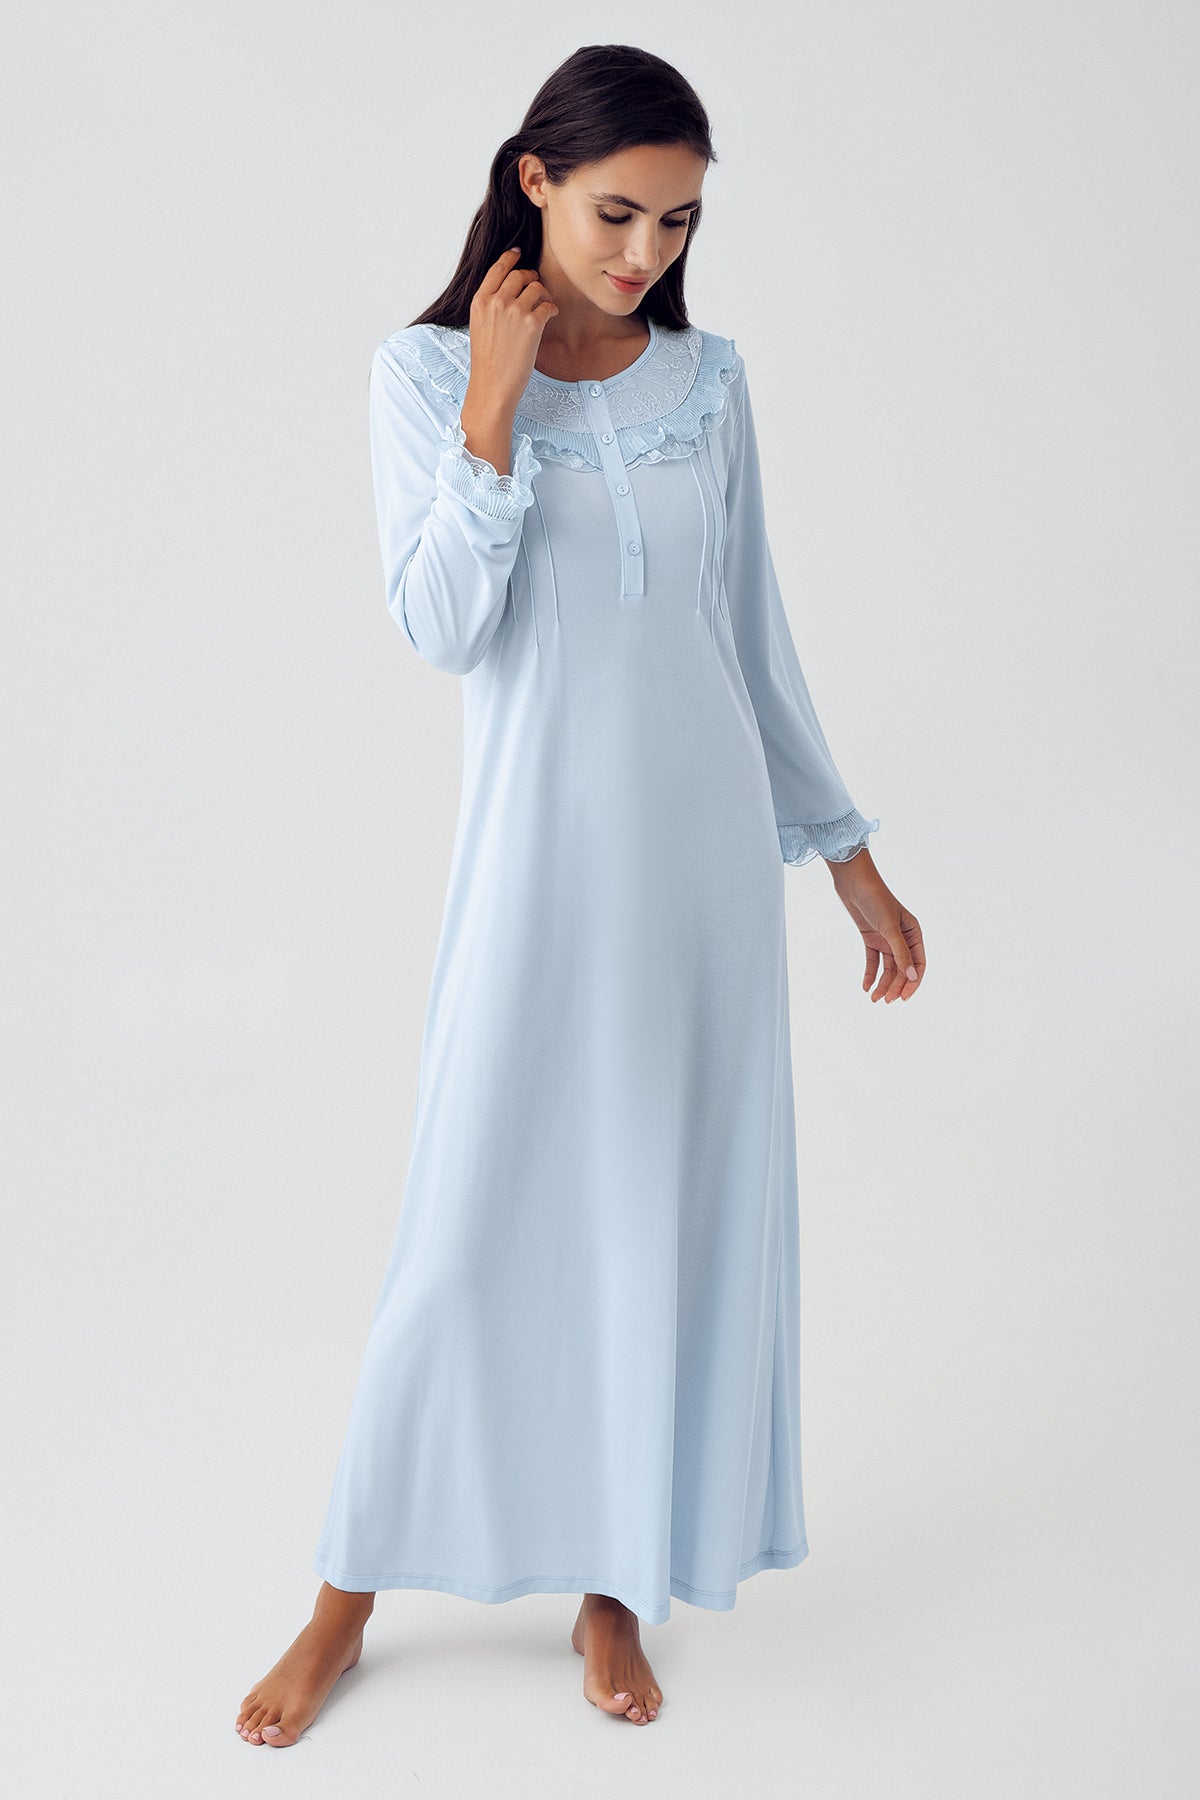 Shopymommy 15410 Lace Detailed Maternity & Nursing Nightgown With Robe Blue